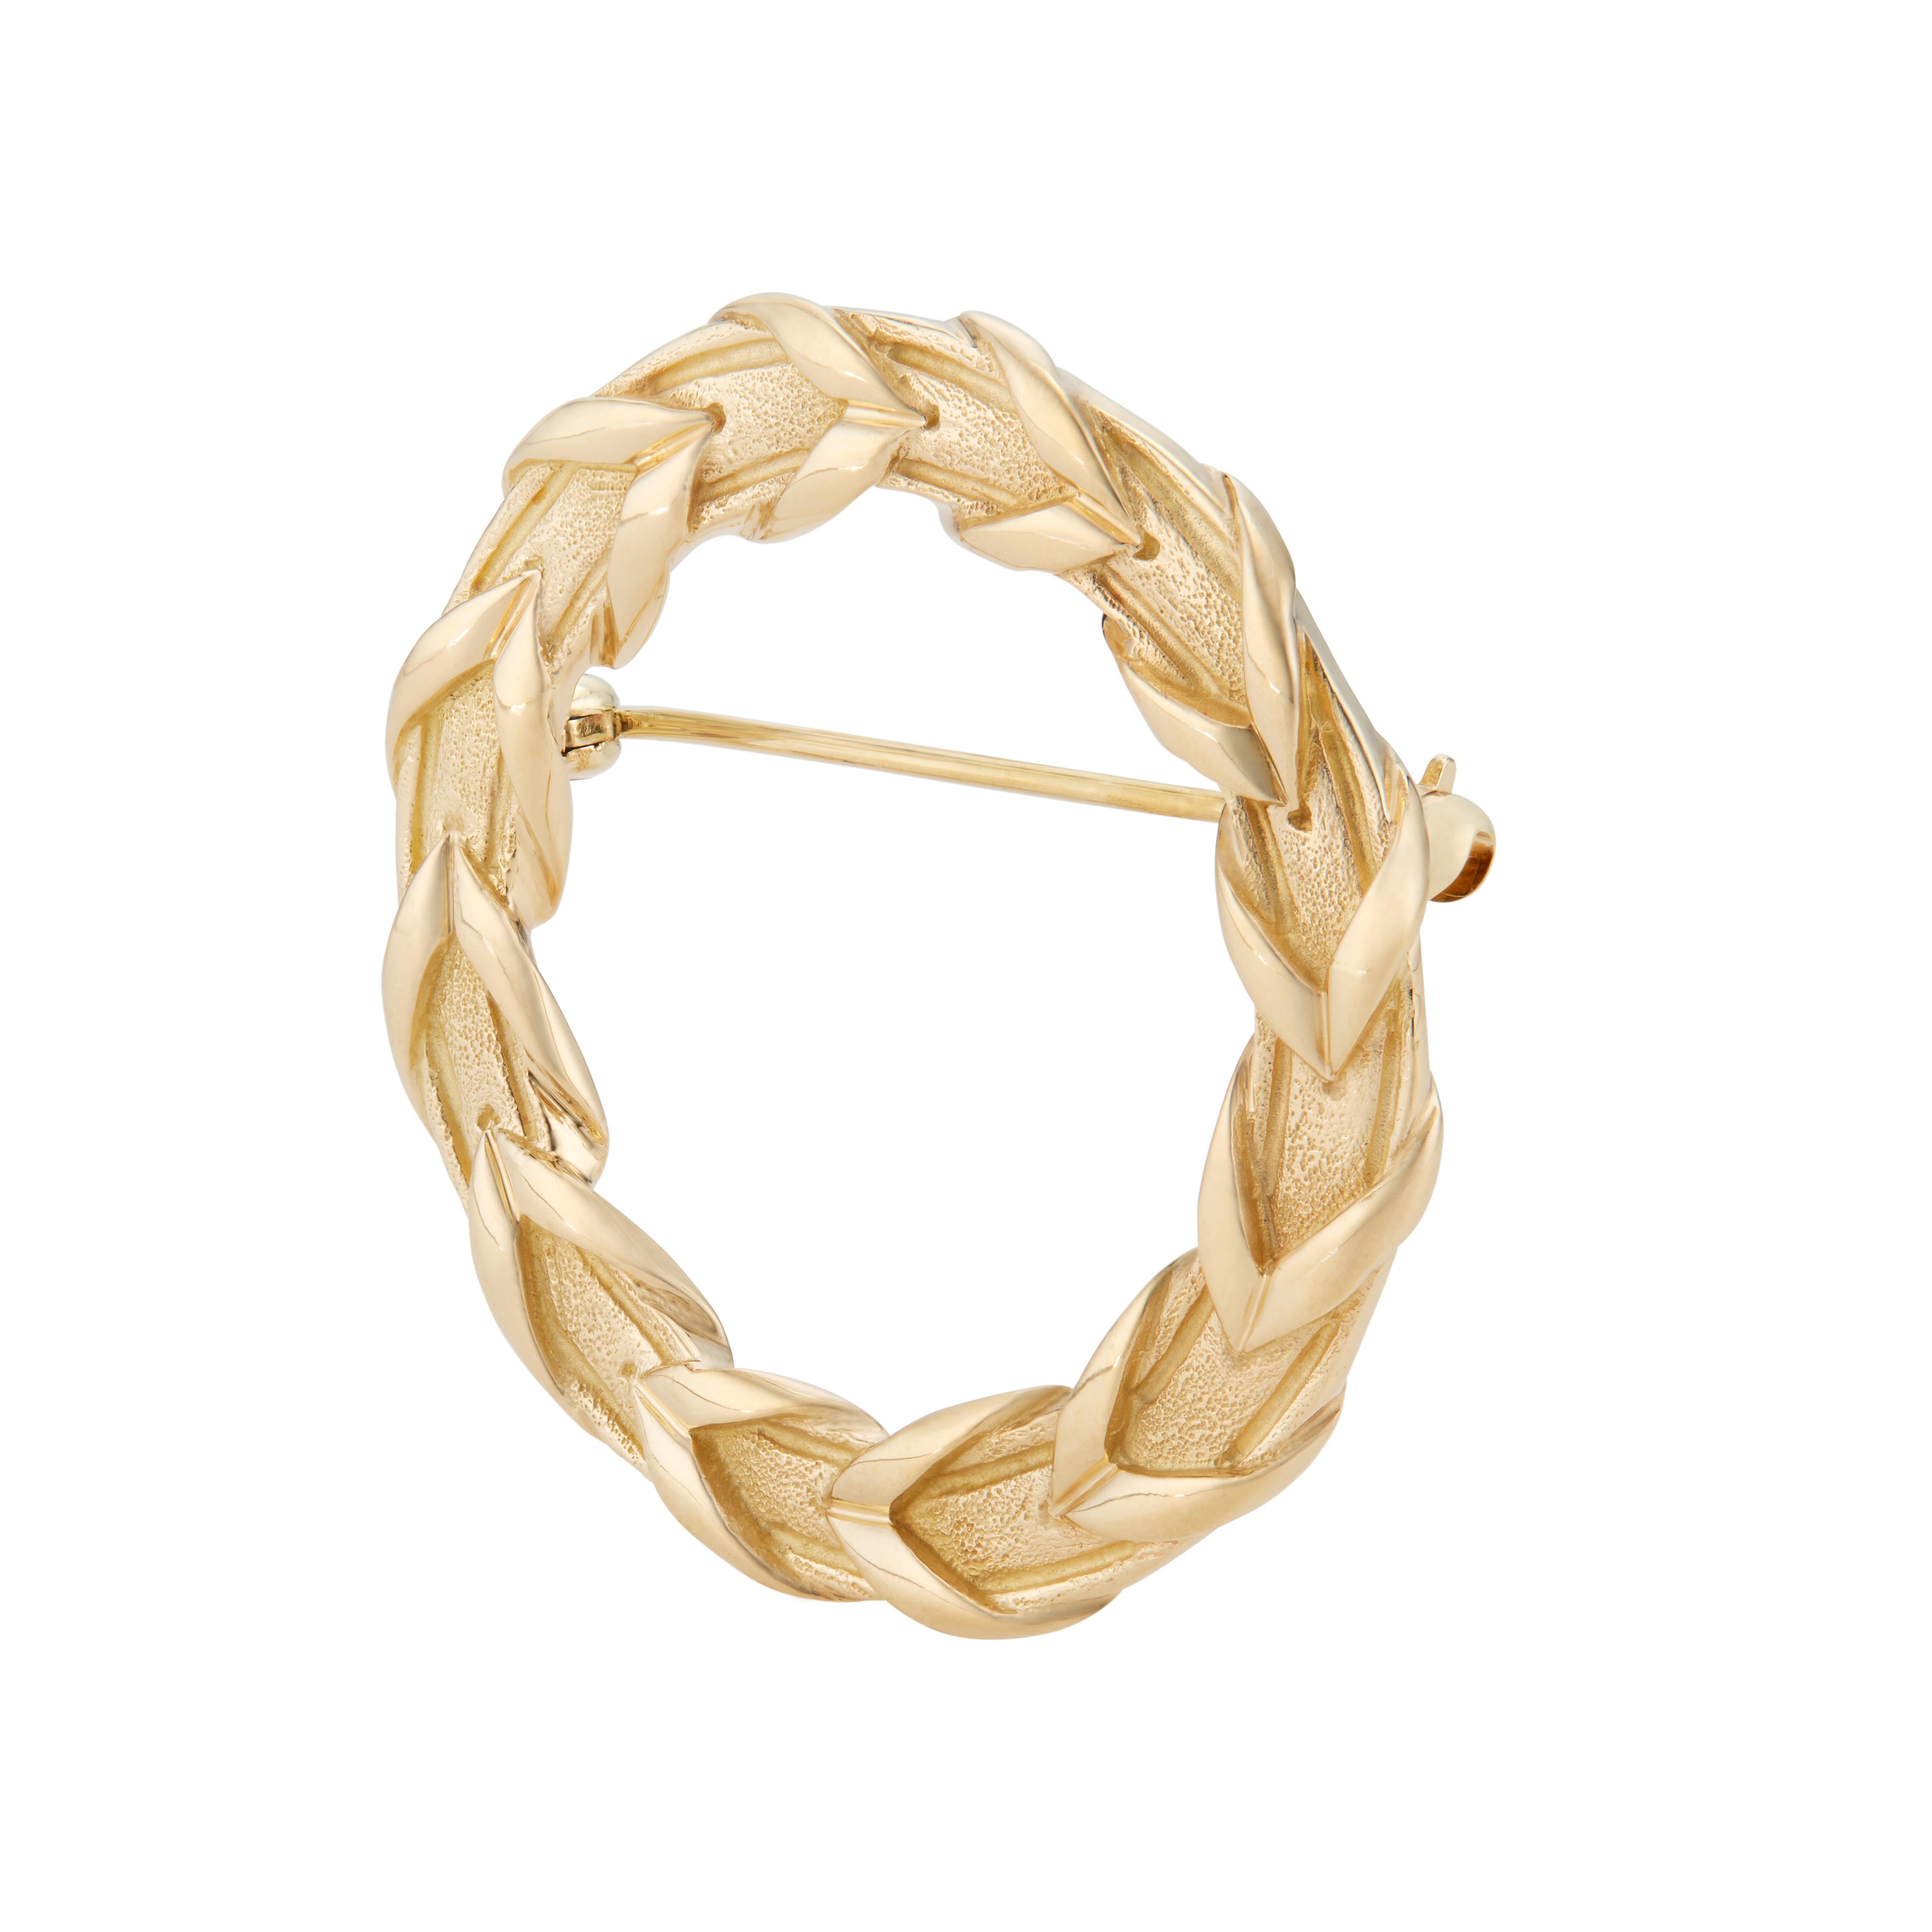 Tiffany & Co open circle 18k yellow gold wreath brooch.

18k yellow gold 
Stamped: 750
Hallmark: T+ Co 1983
10.5 grams
Top to bottom: 33.8mm or 1 1/3 Inch
Width: 34mm or 1 1/3 Inch
Depth or thickness: 2.5mm
